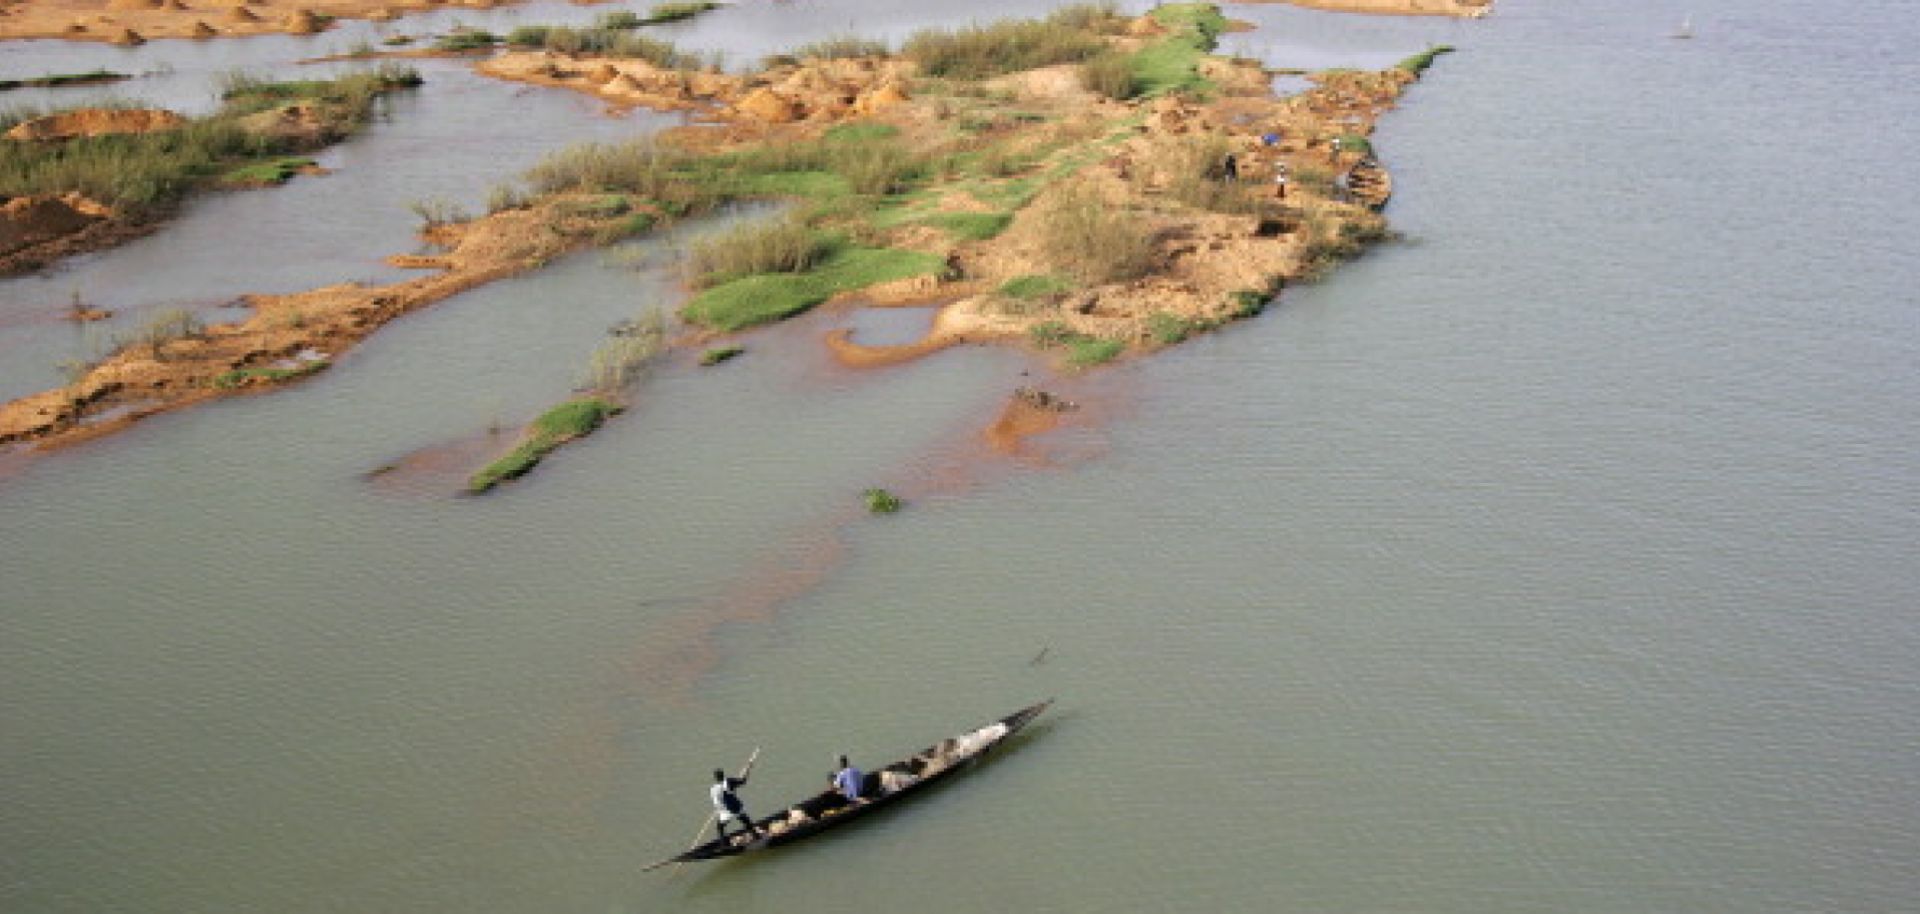 The Niger River is the backbone of Mali